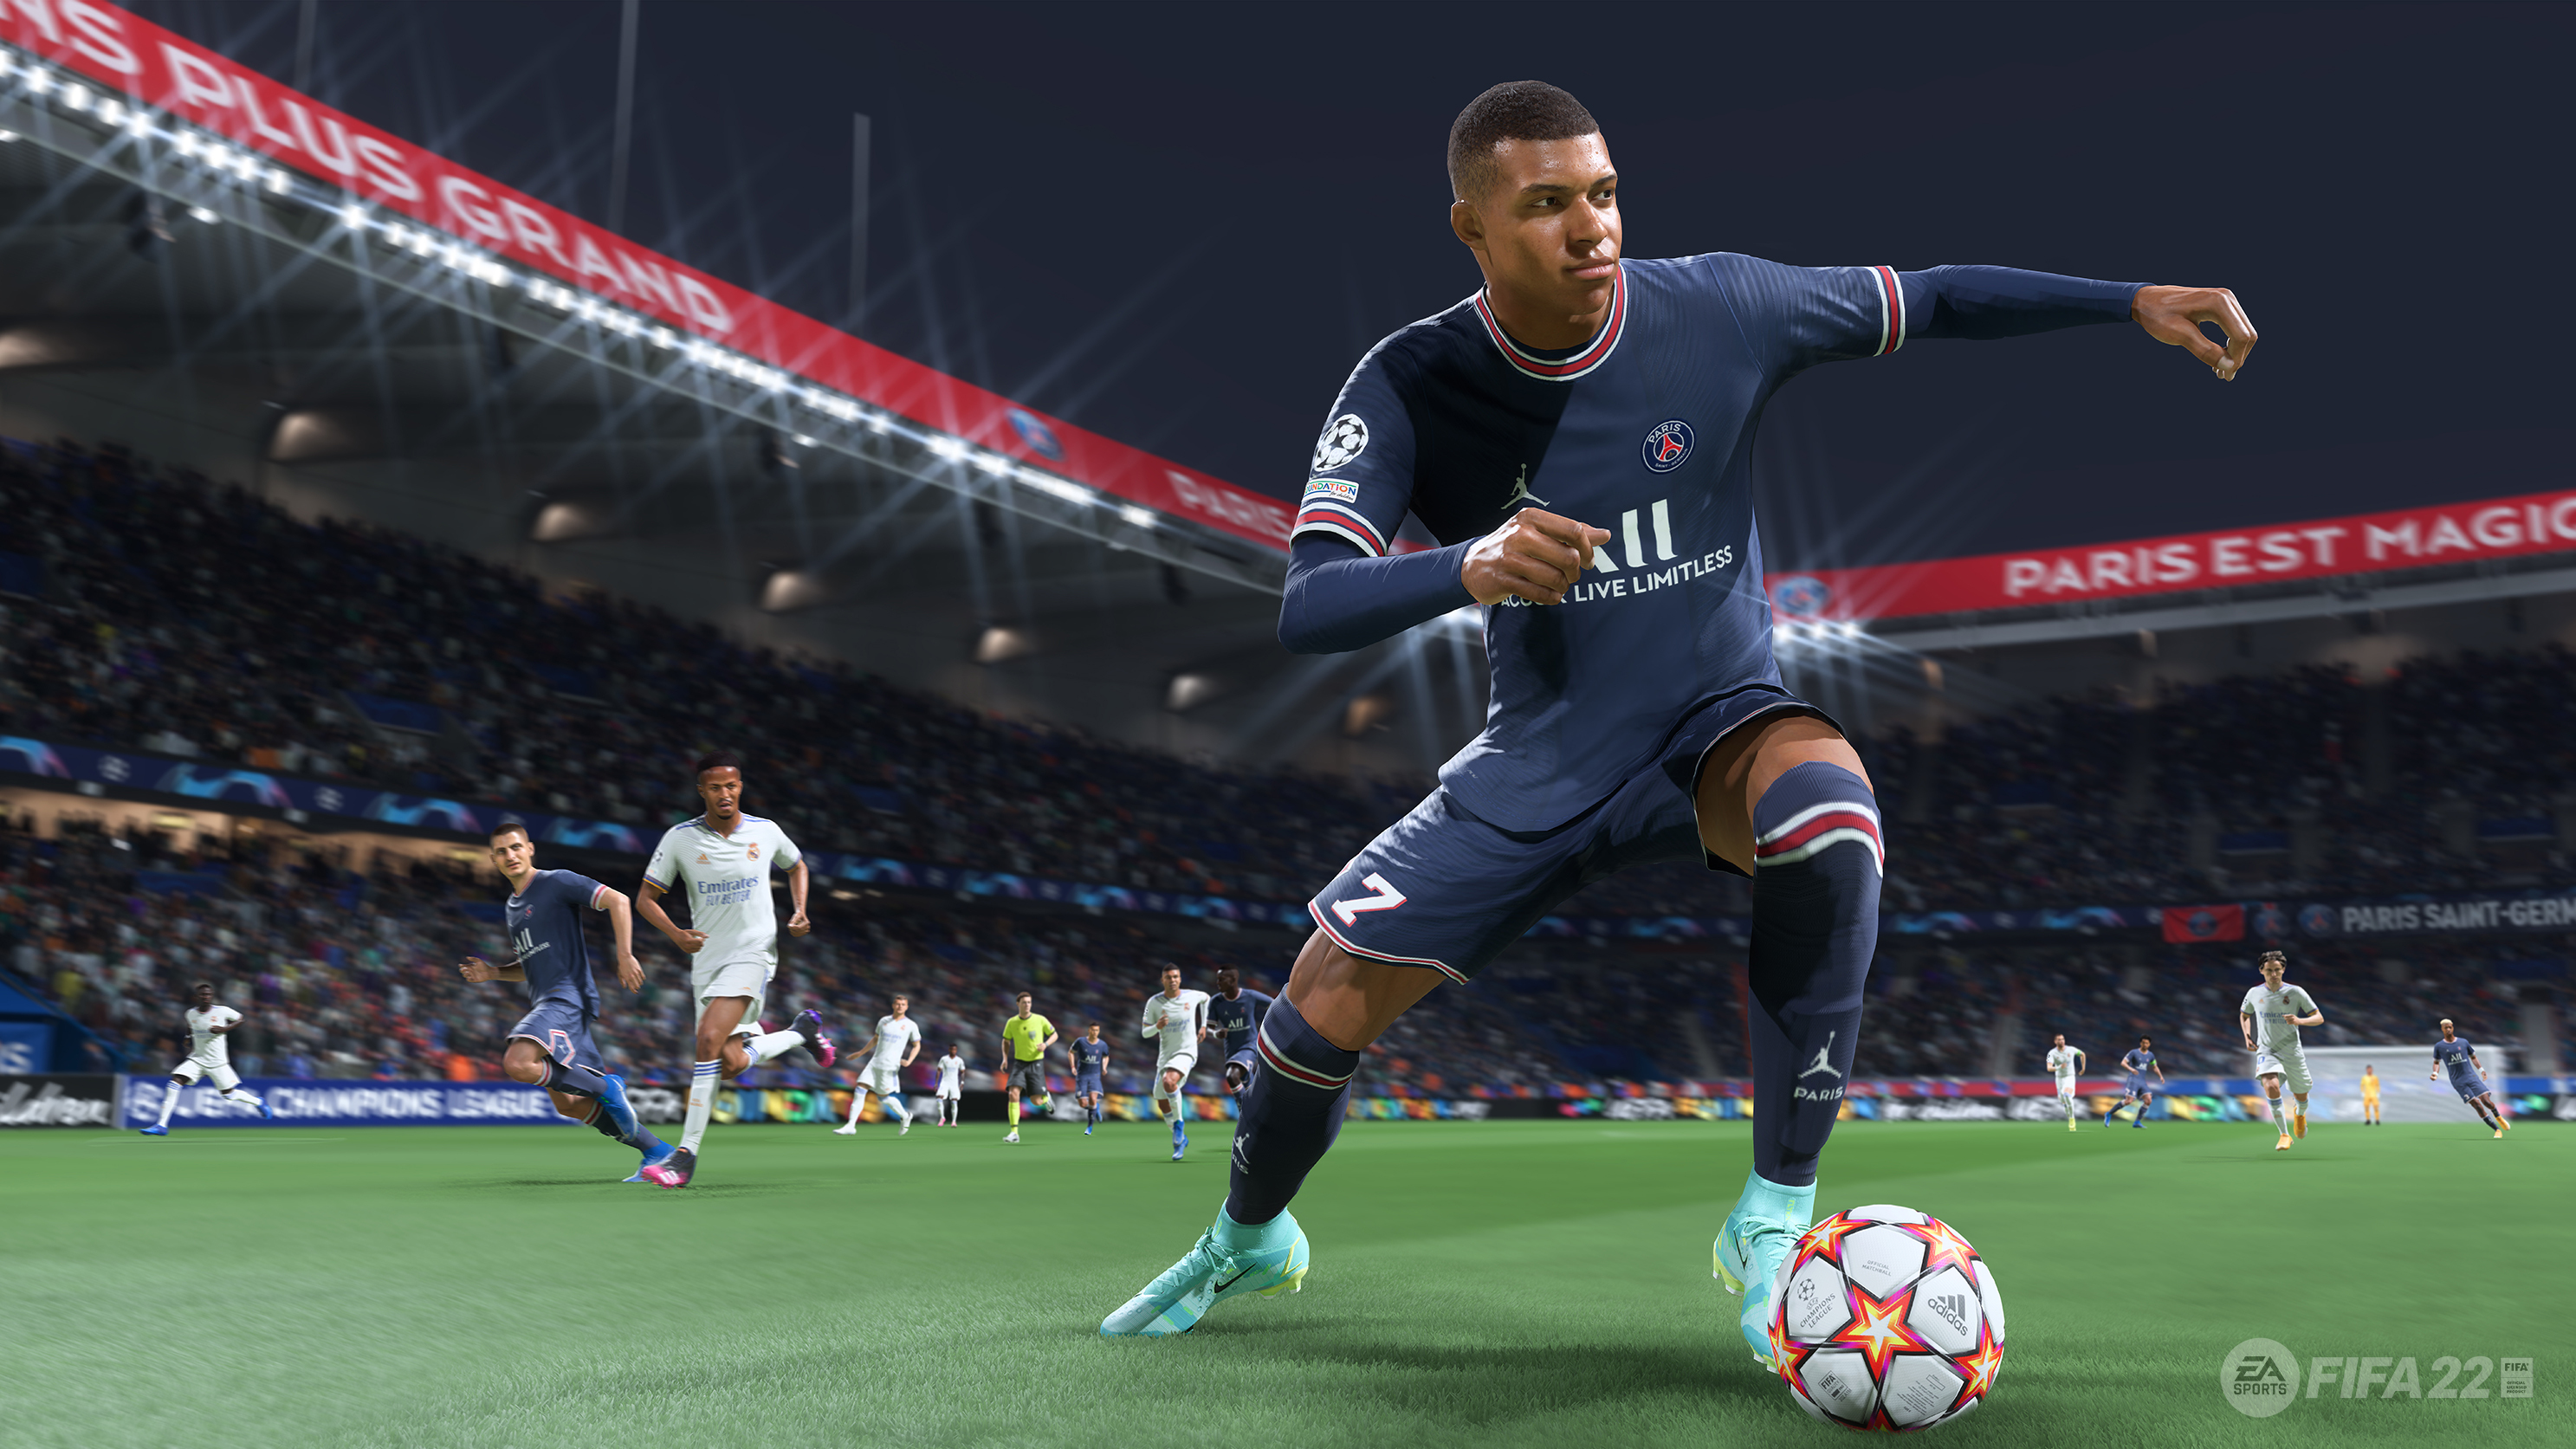 Mezquita Entrada dorado FIFA 22 review: This is the most realistic game yet | FourFourTwo